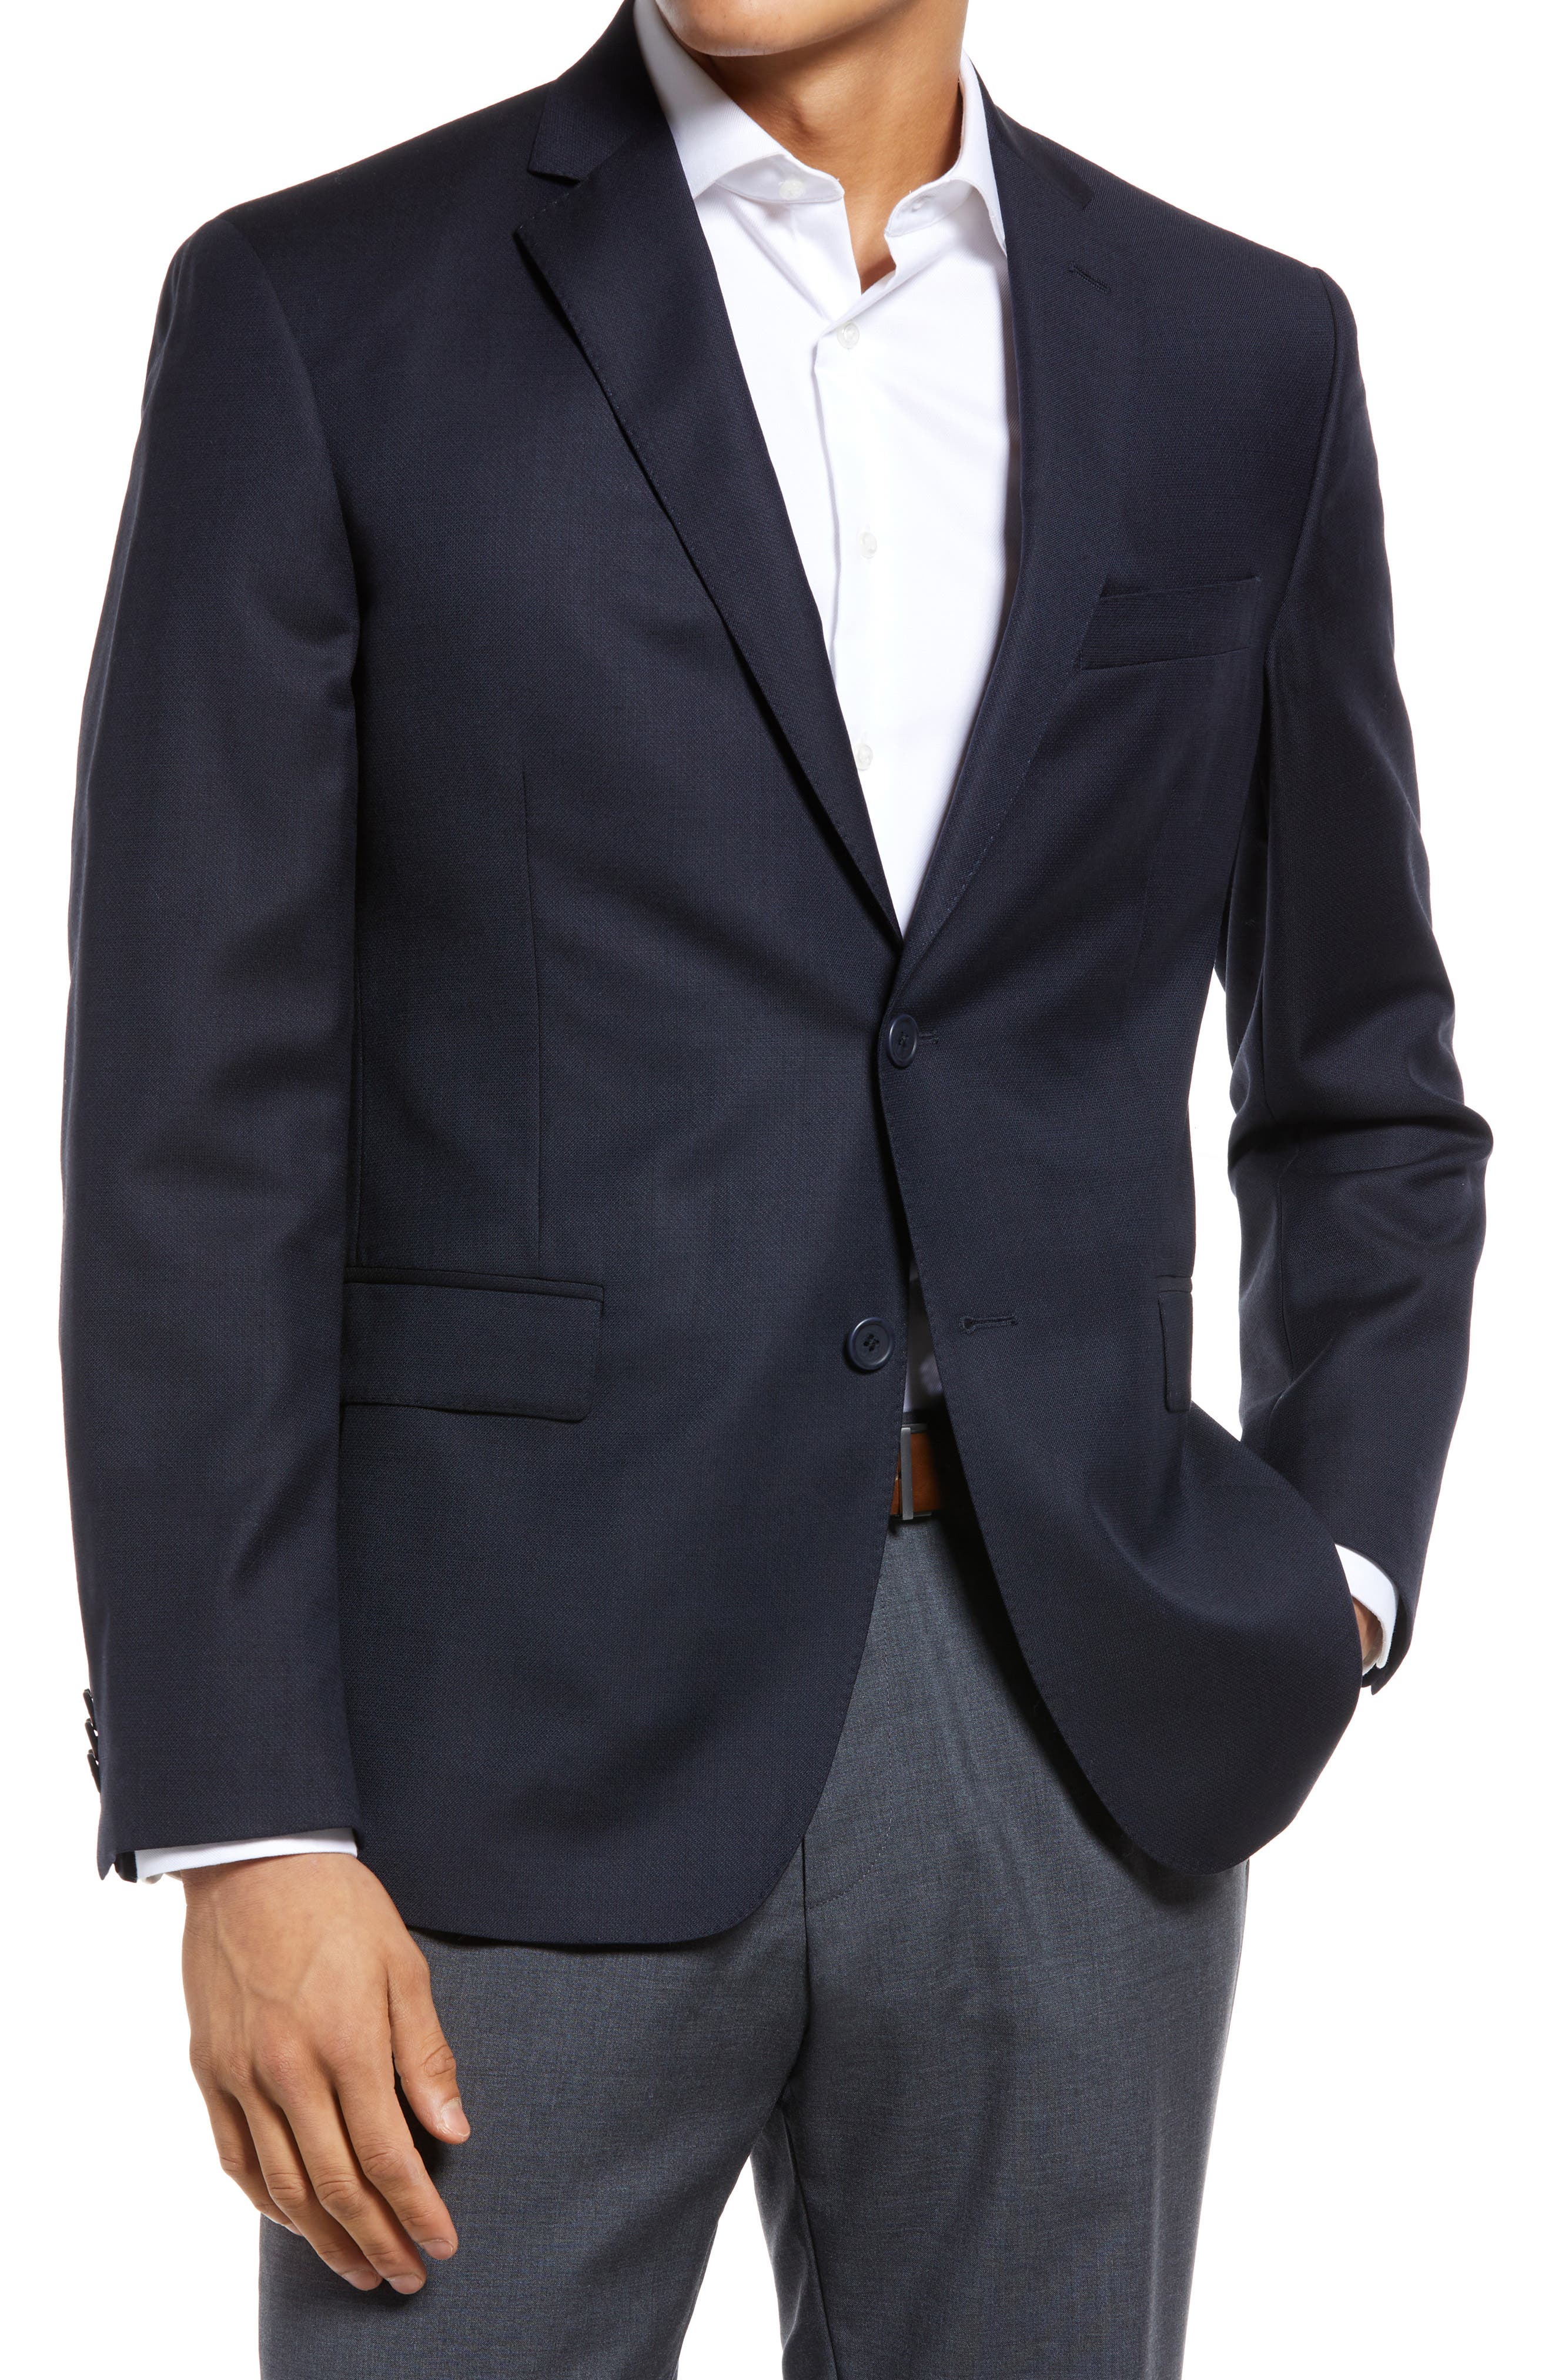 JB Britches Wool Sport Coat in Navy at Nordstrom